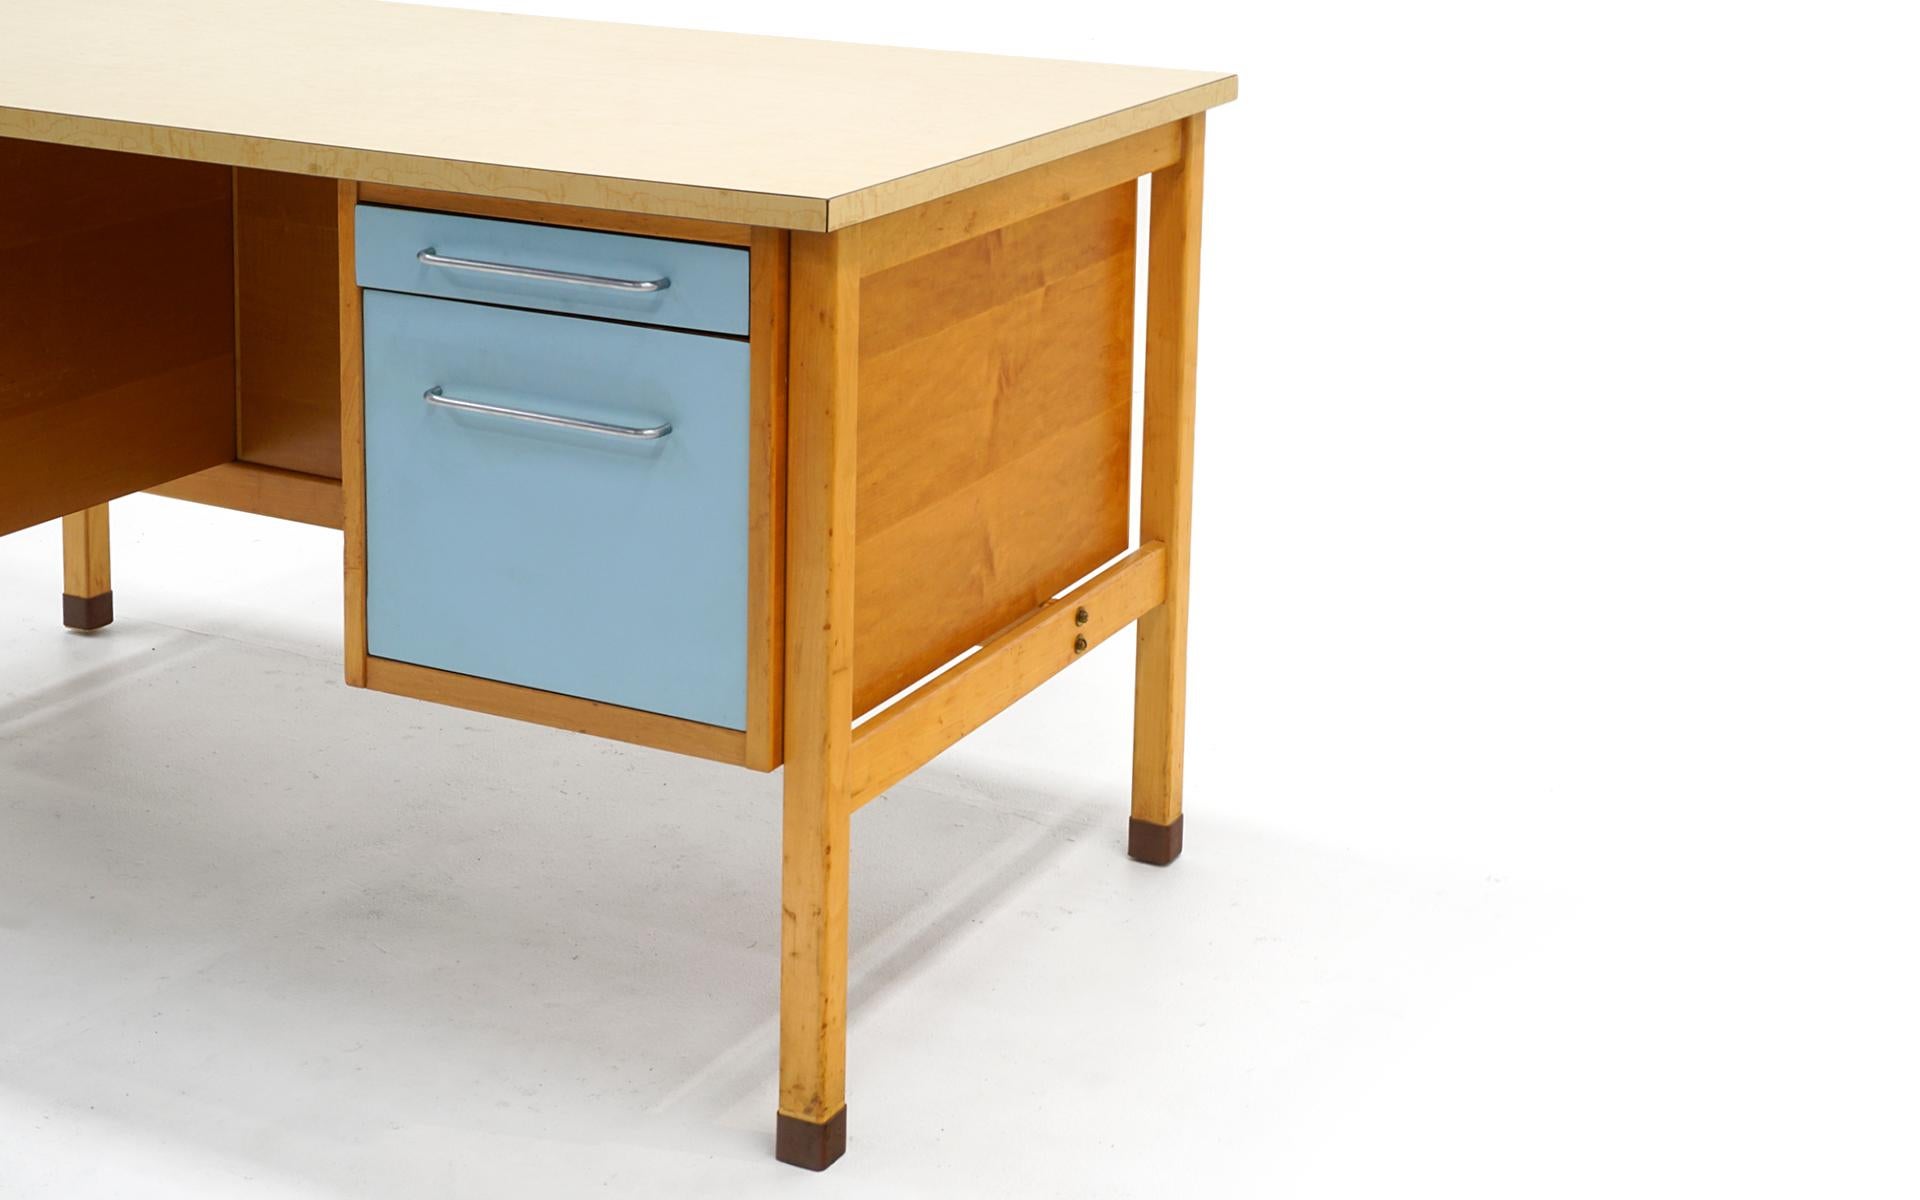 Mid-Century Modern Desk by Jens Risom, Blonde Wood, Blue Drawer Fronts, Chrome Pulls, Laminate Top For Sale